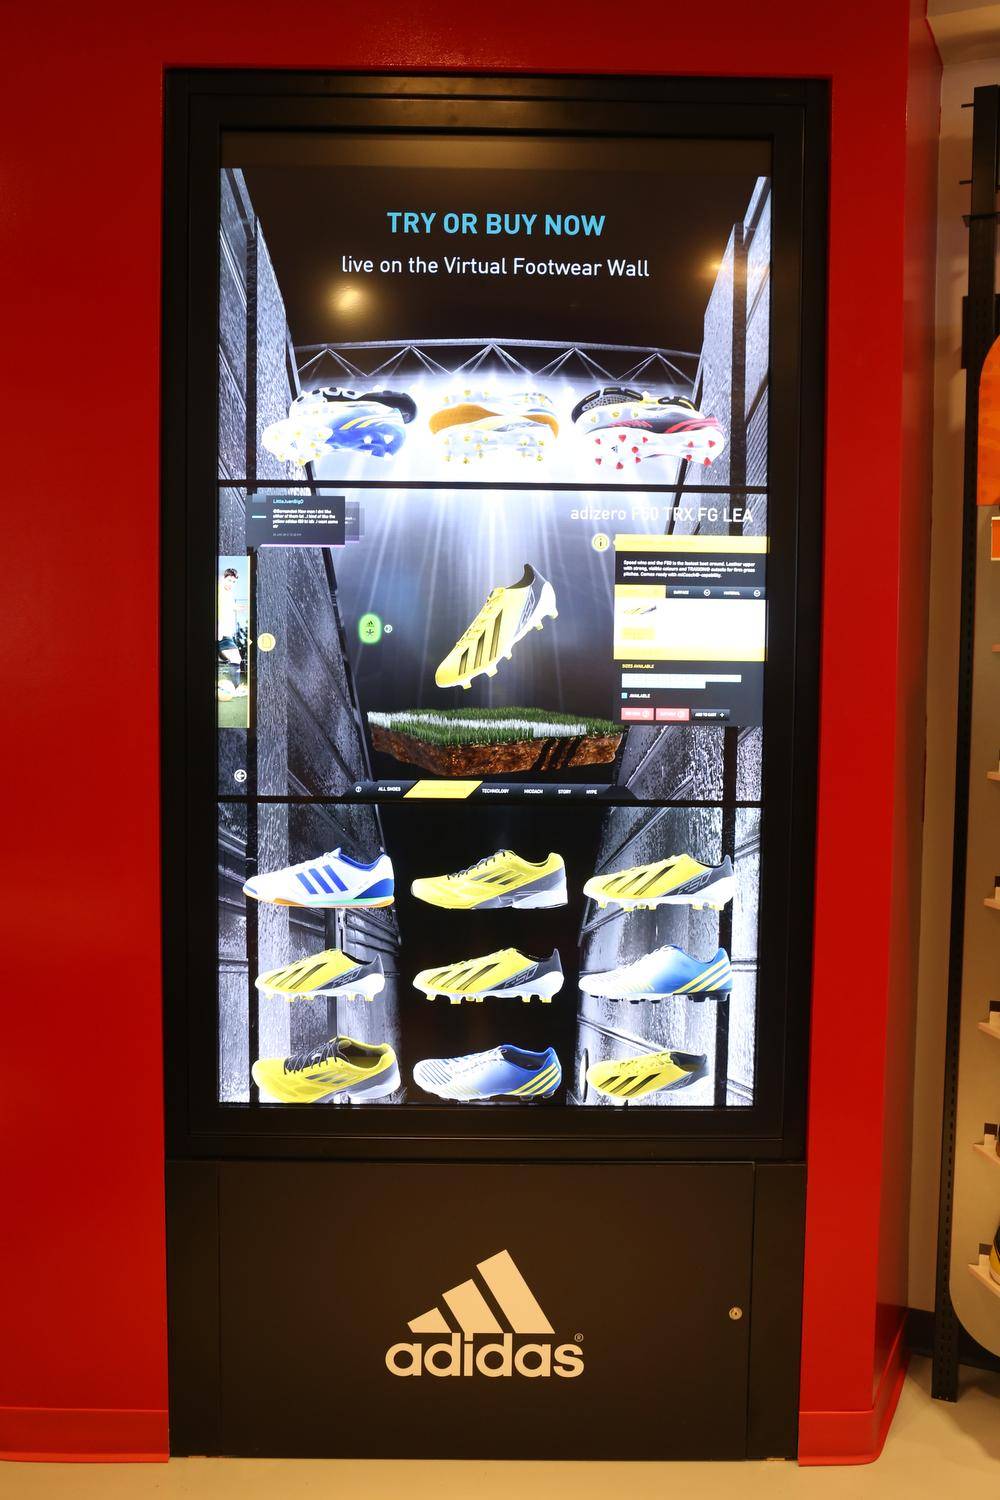 In Pictures: A look inside Sport Chek's high-tech new outlet - The